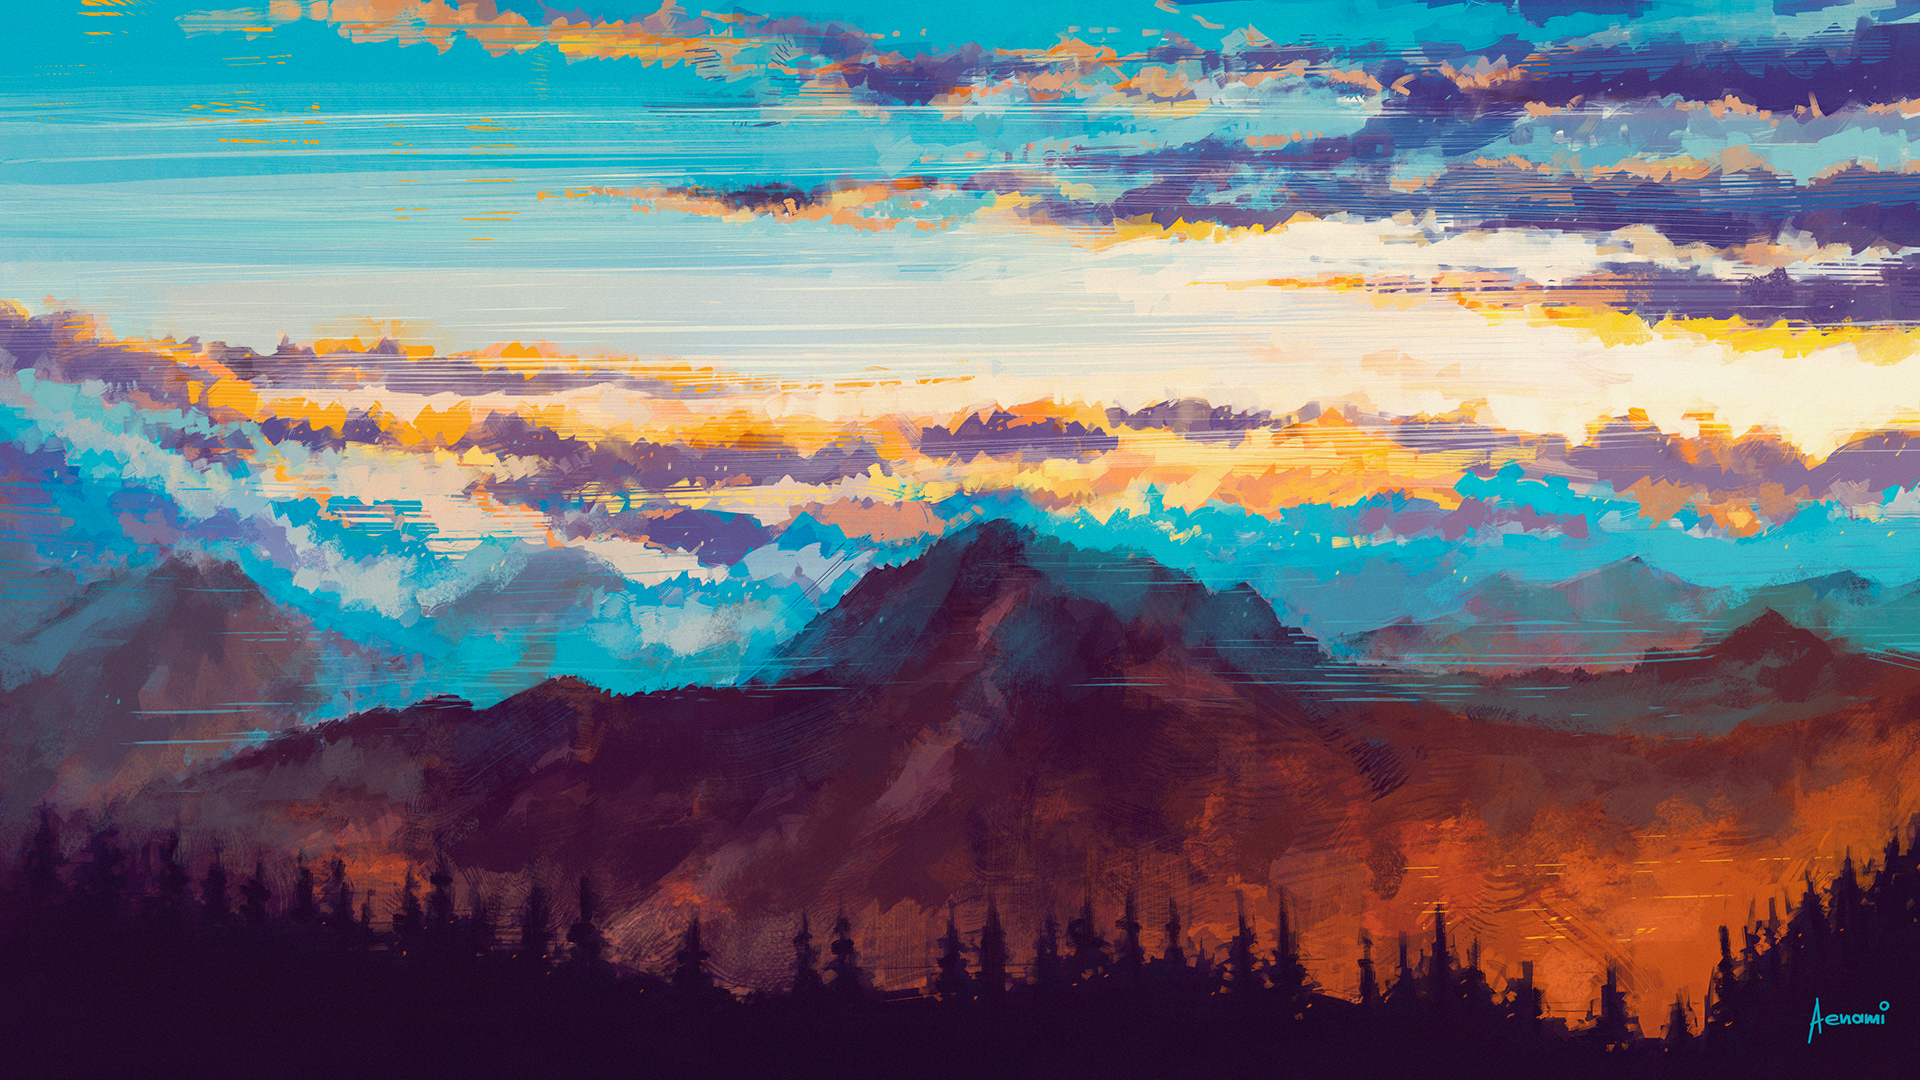 Forest Mountain Artistic Wallpapers